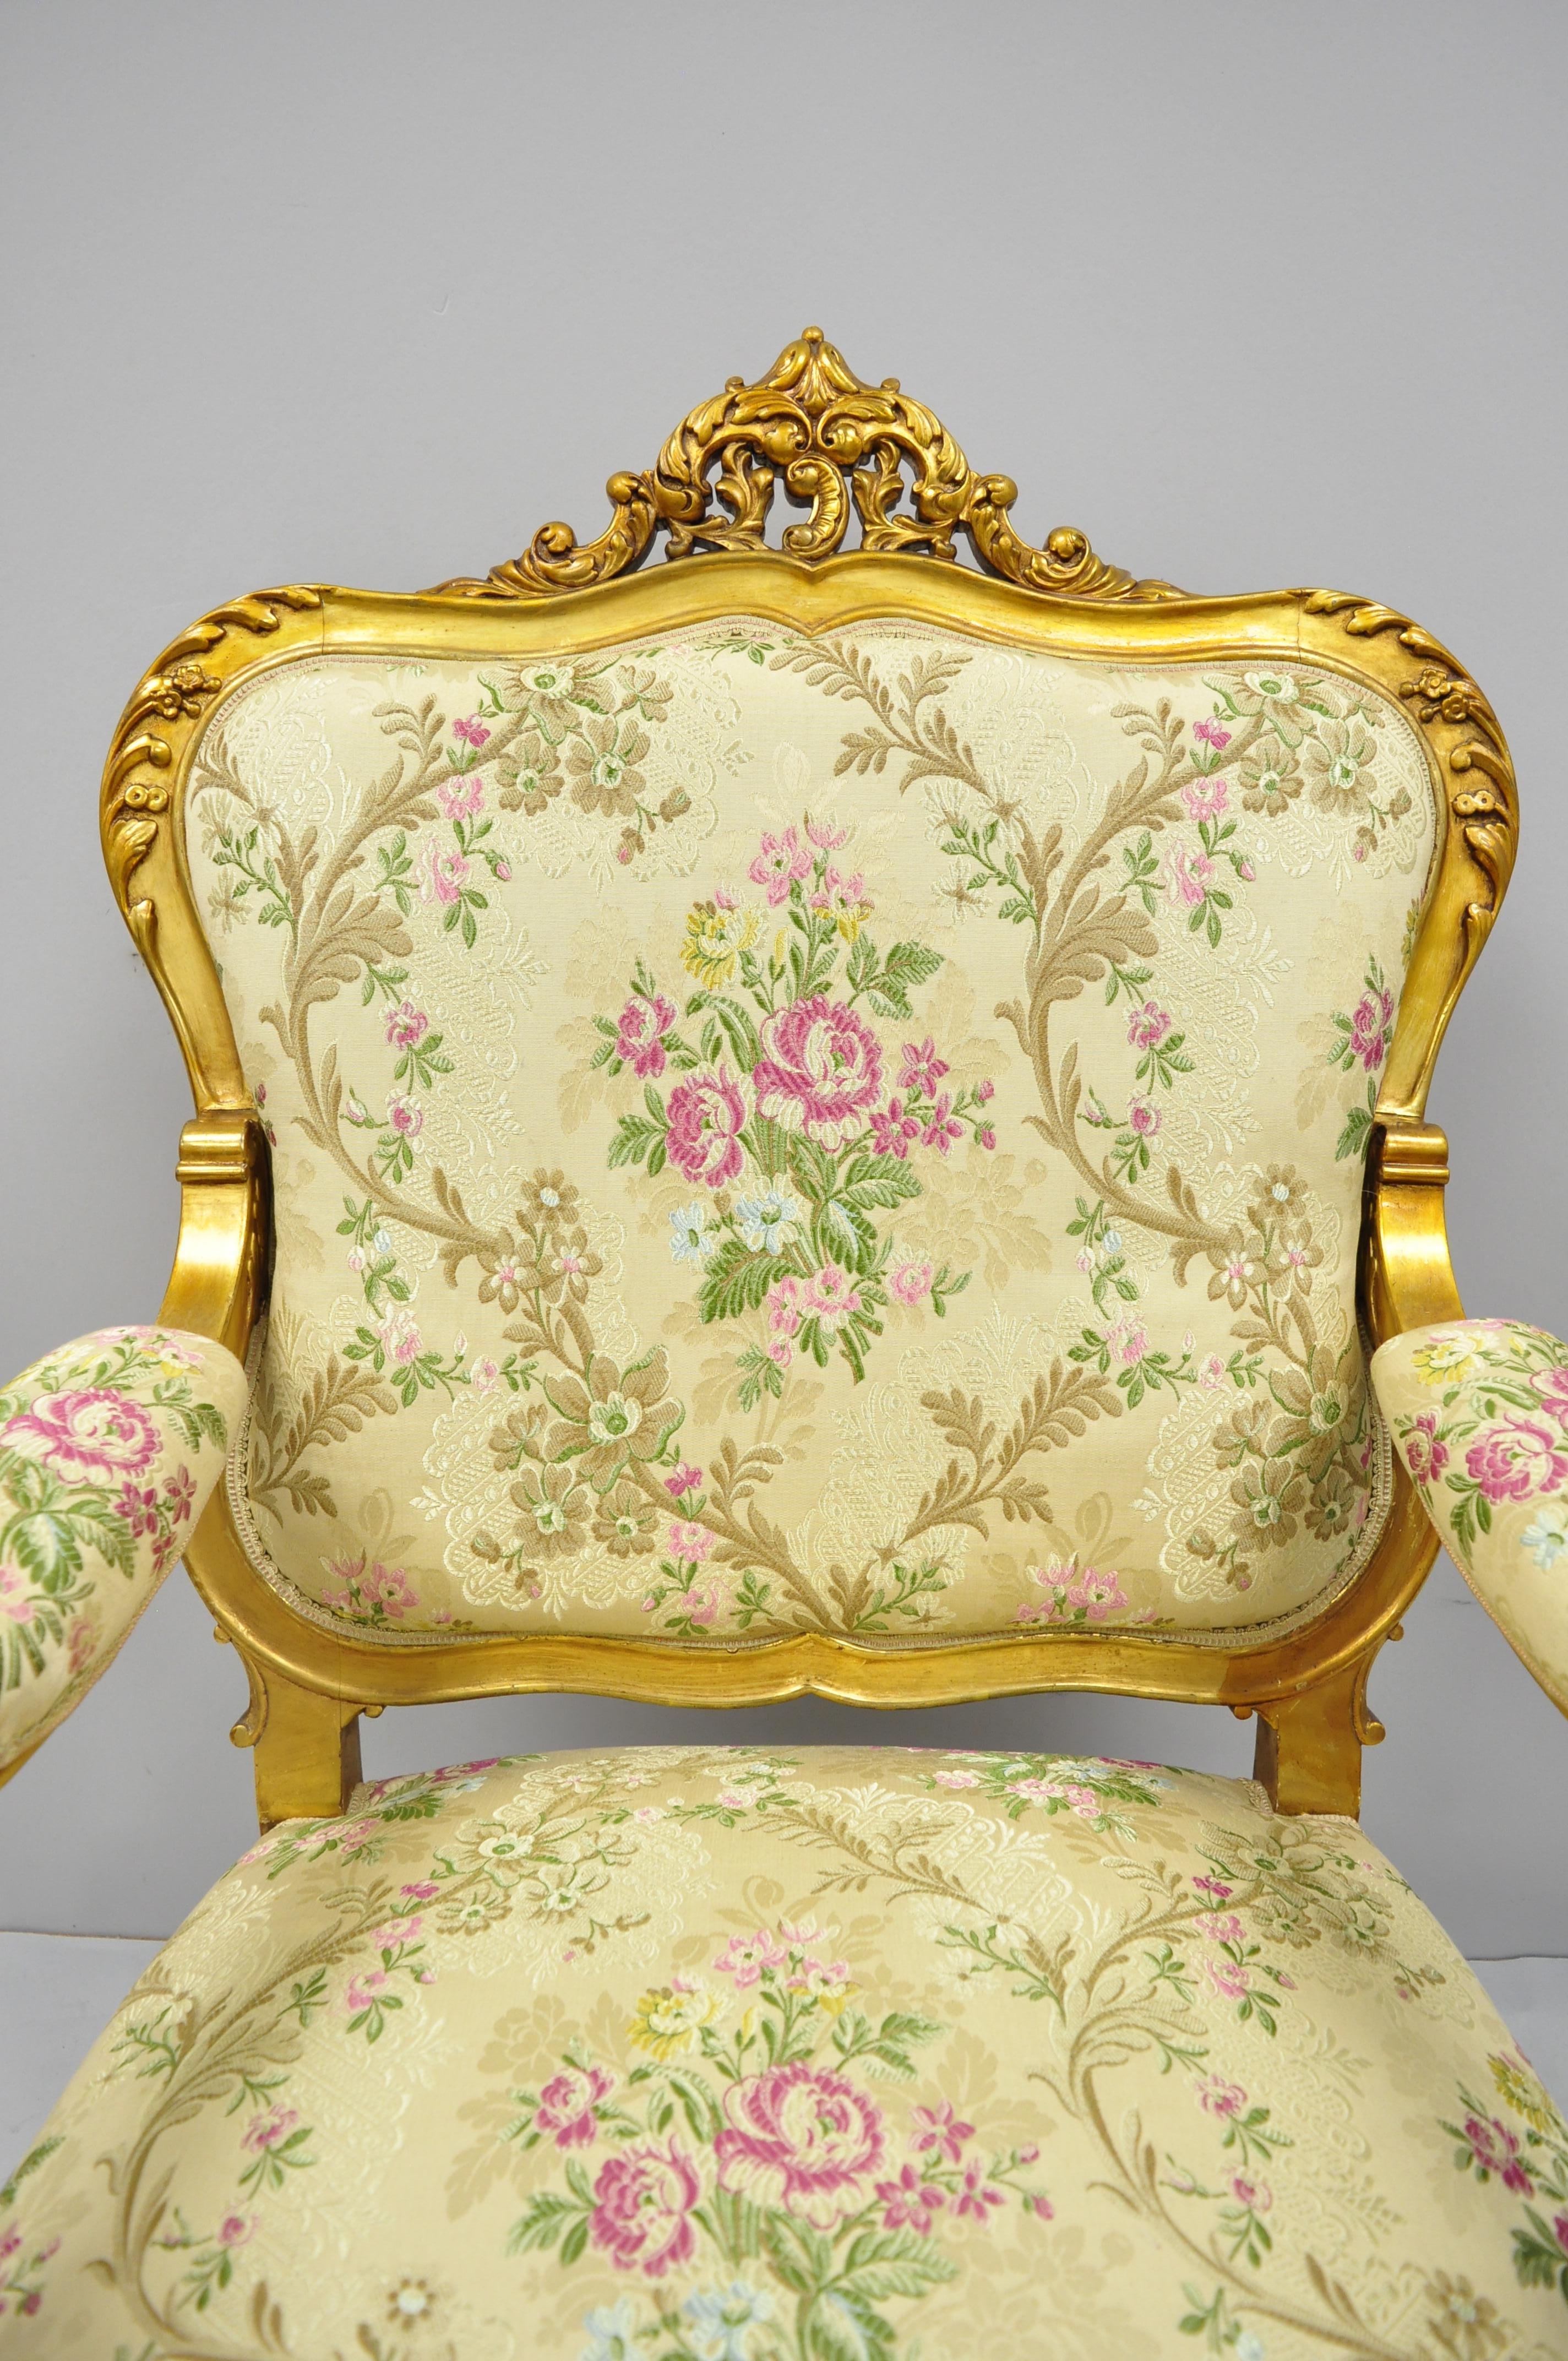 1920s French Louis XV Rococo Style Gold Gilt Parlor Chair Armchair 1